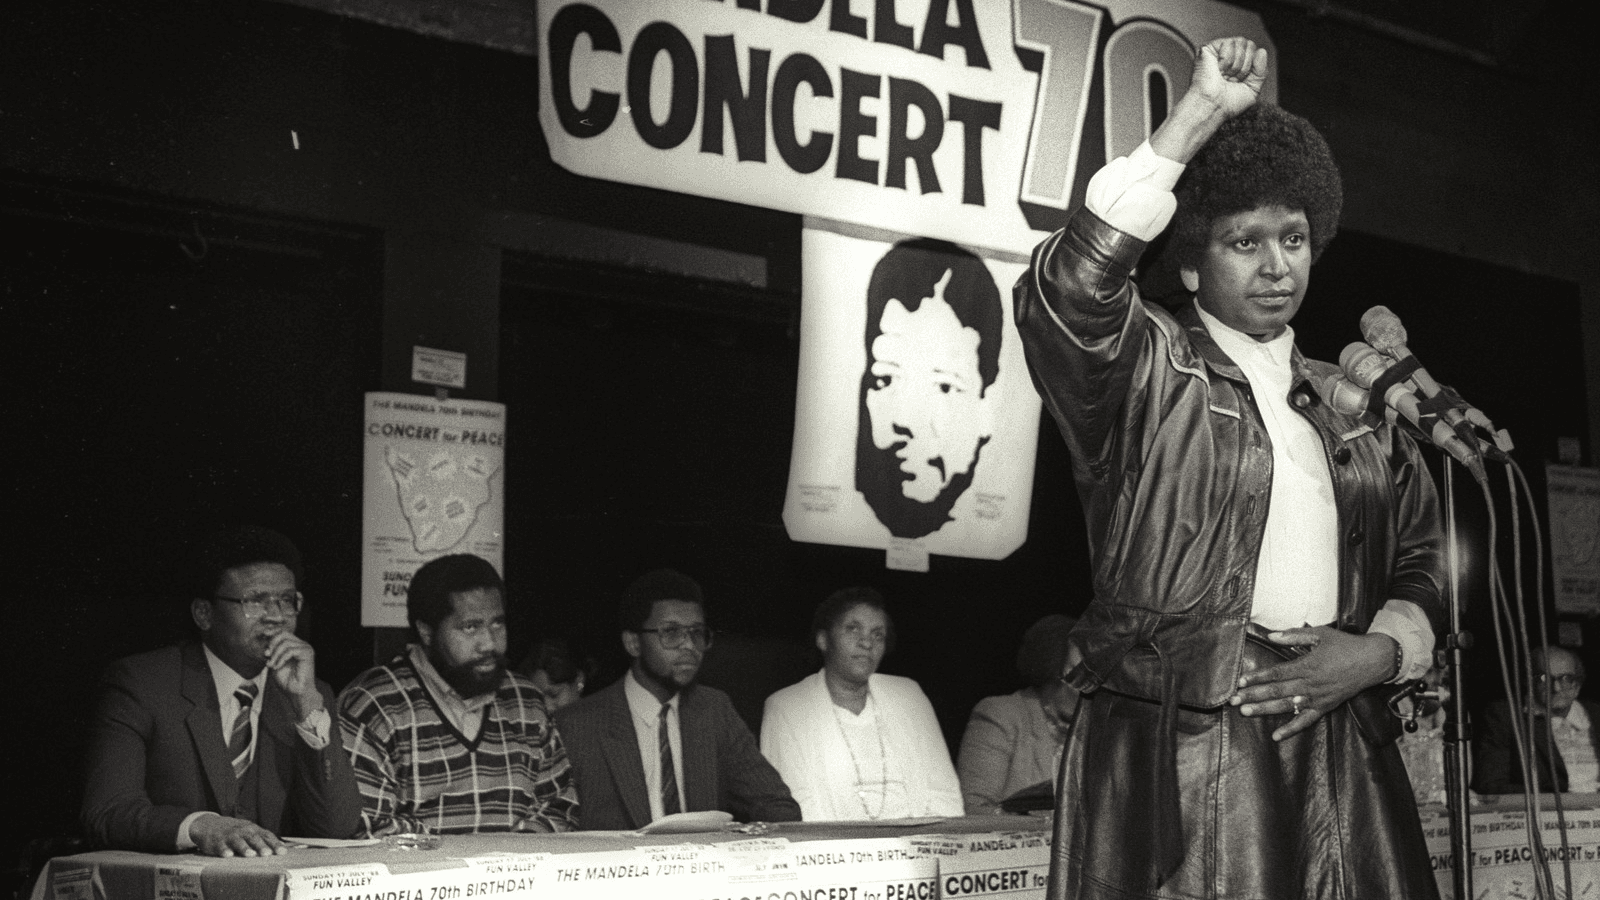 Winnie Mandela raises her fist in a black power salute after announcing that a massive pop concert will be held to mark the 70th birthday of her jailed husband Nelson Mandela, in 1988.